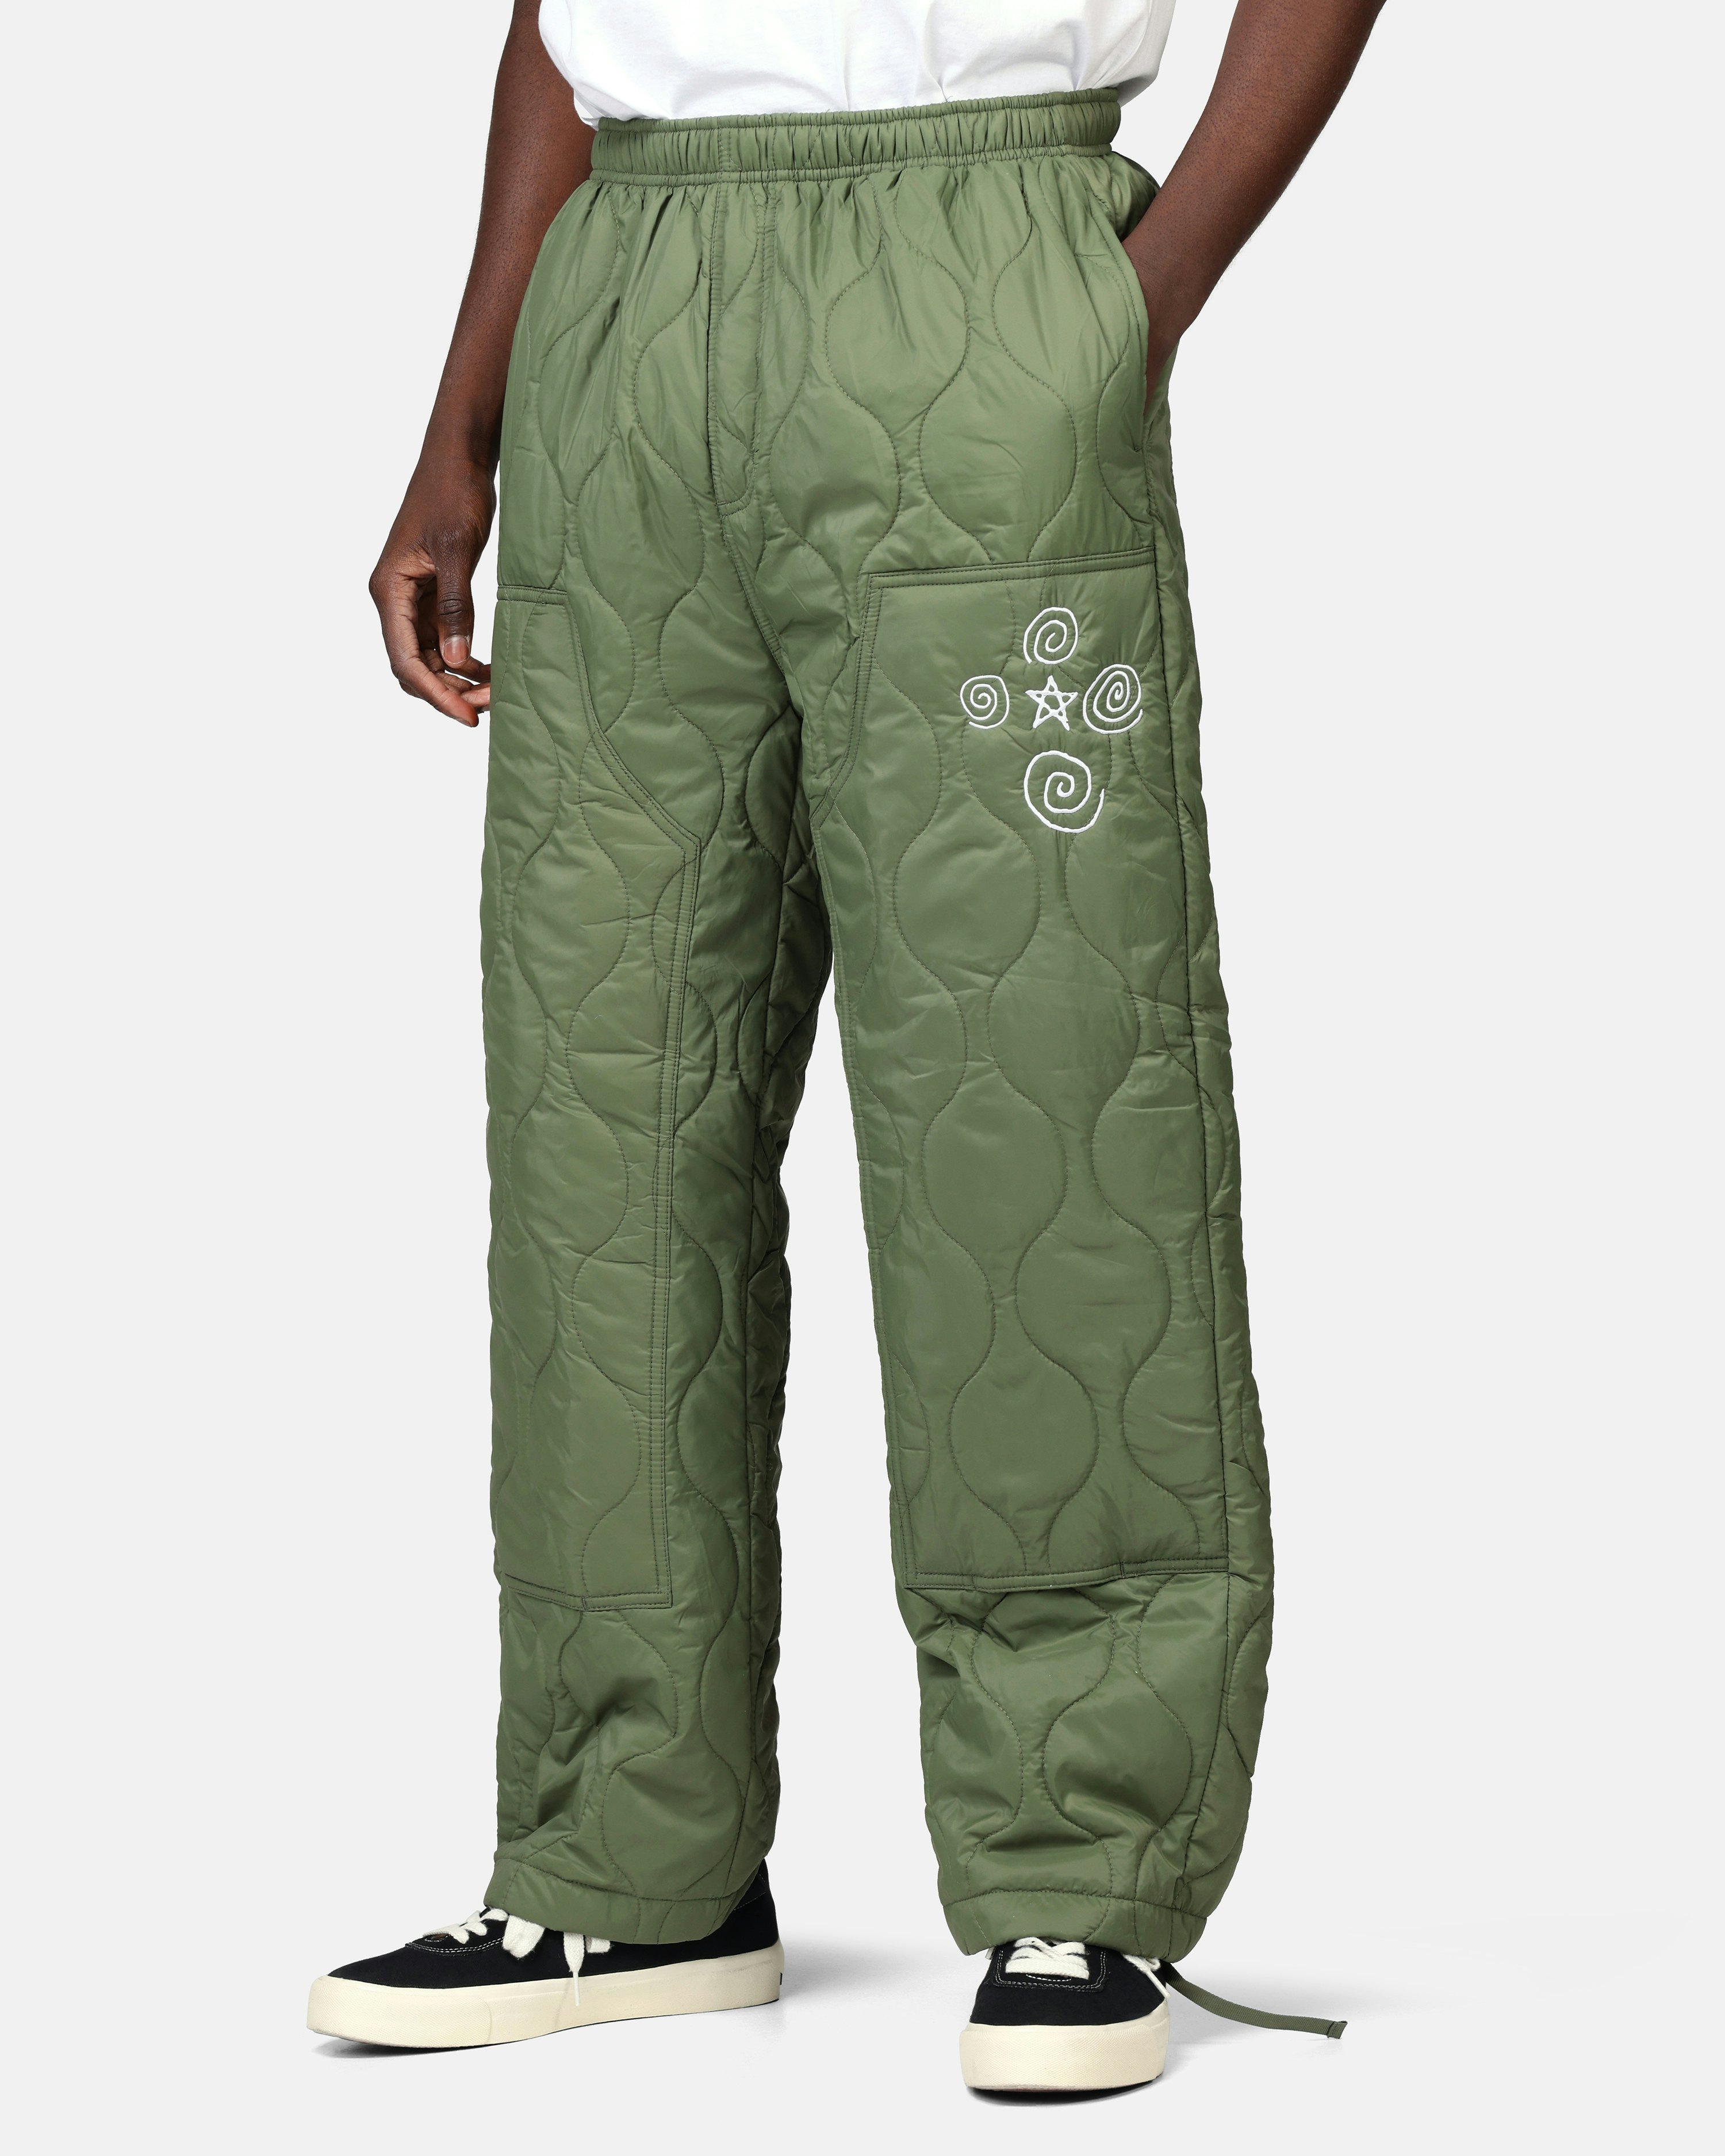 Obey Pant- Baseline Quilted Army green | Men | Junkyard